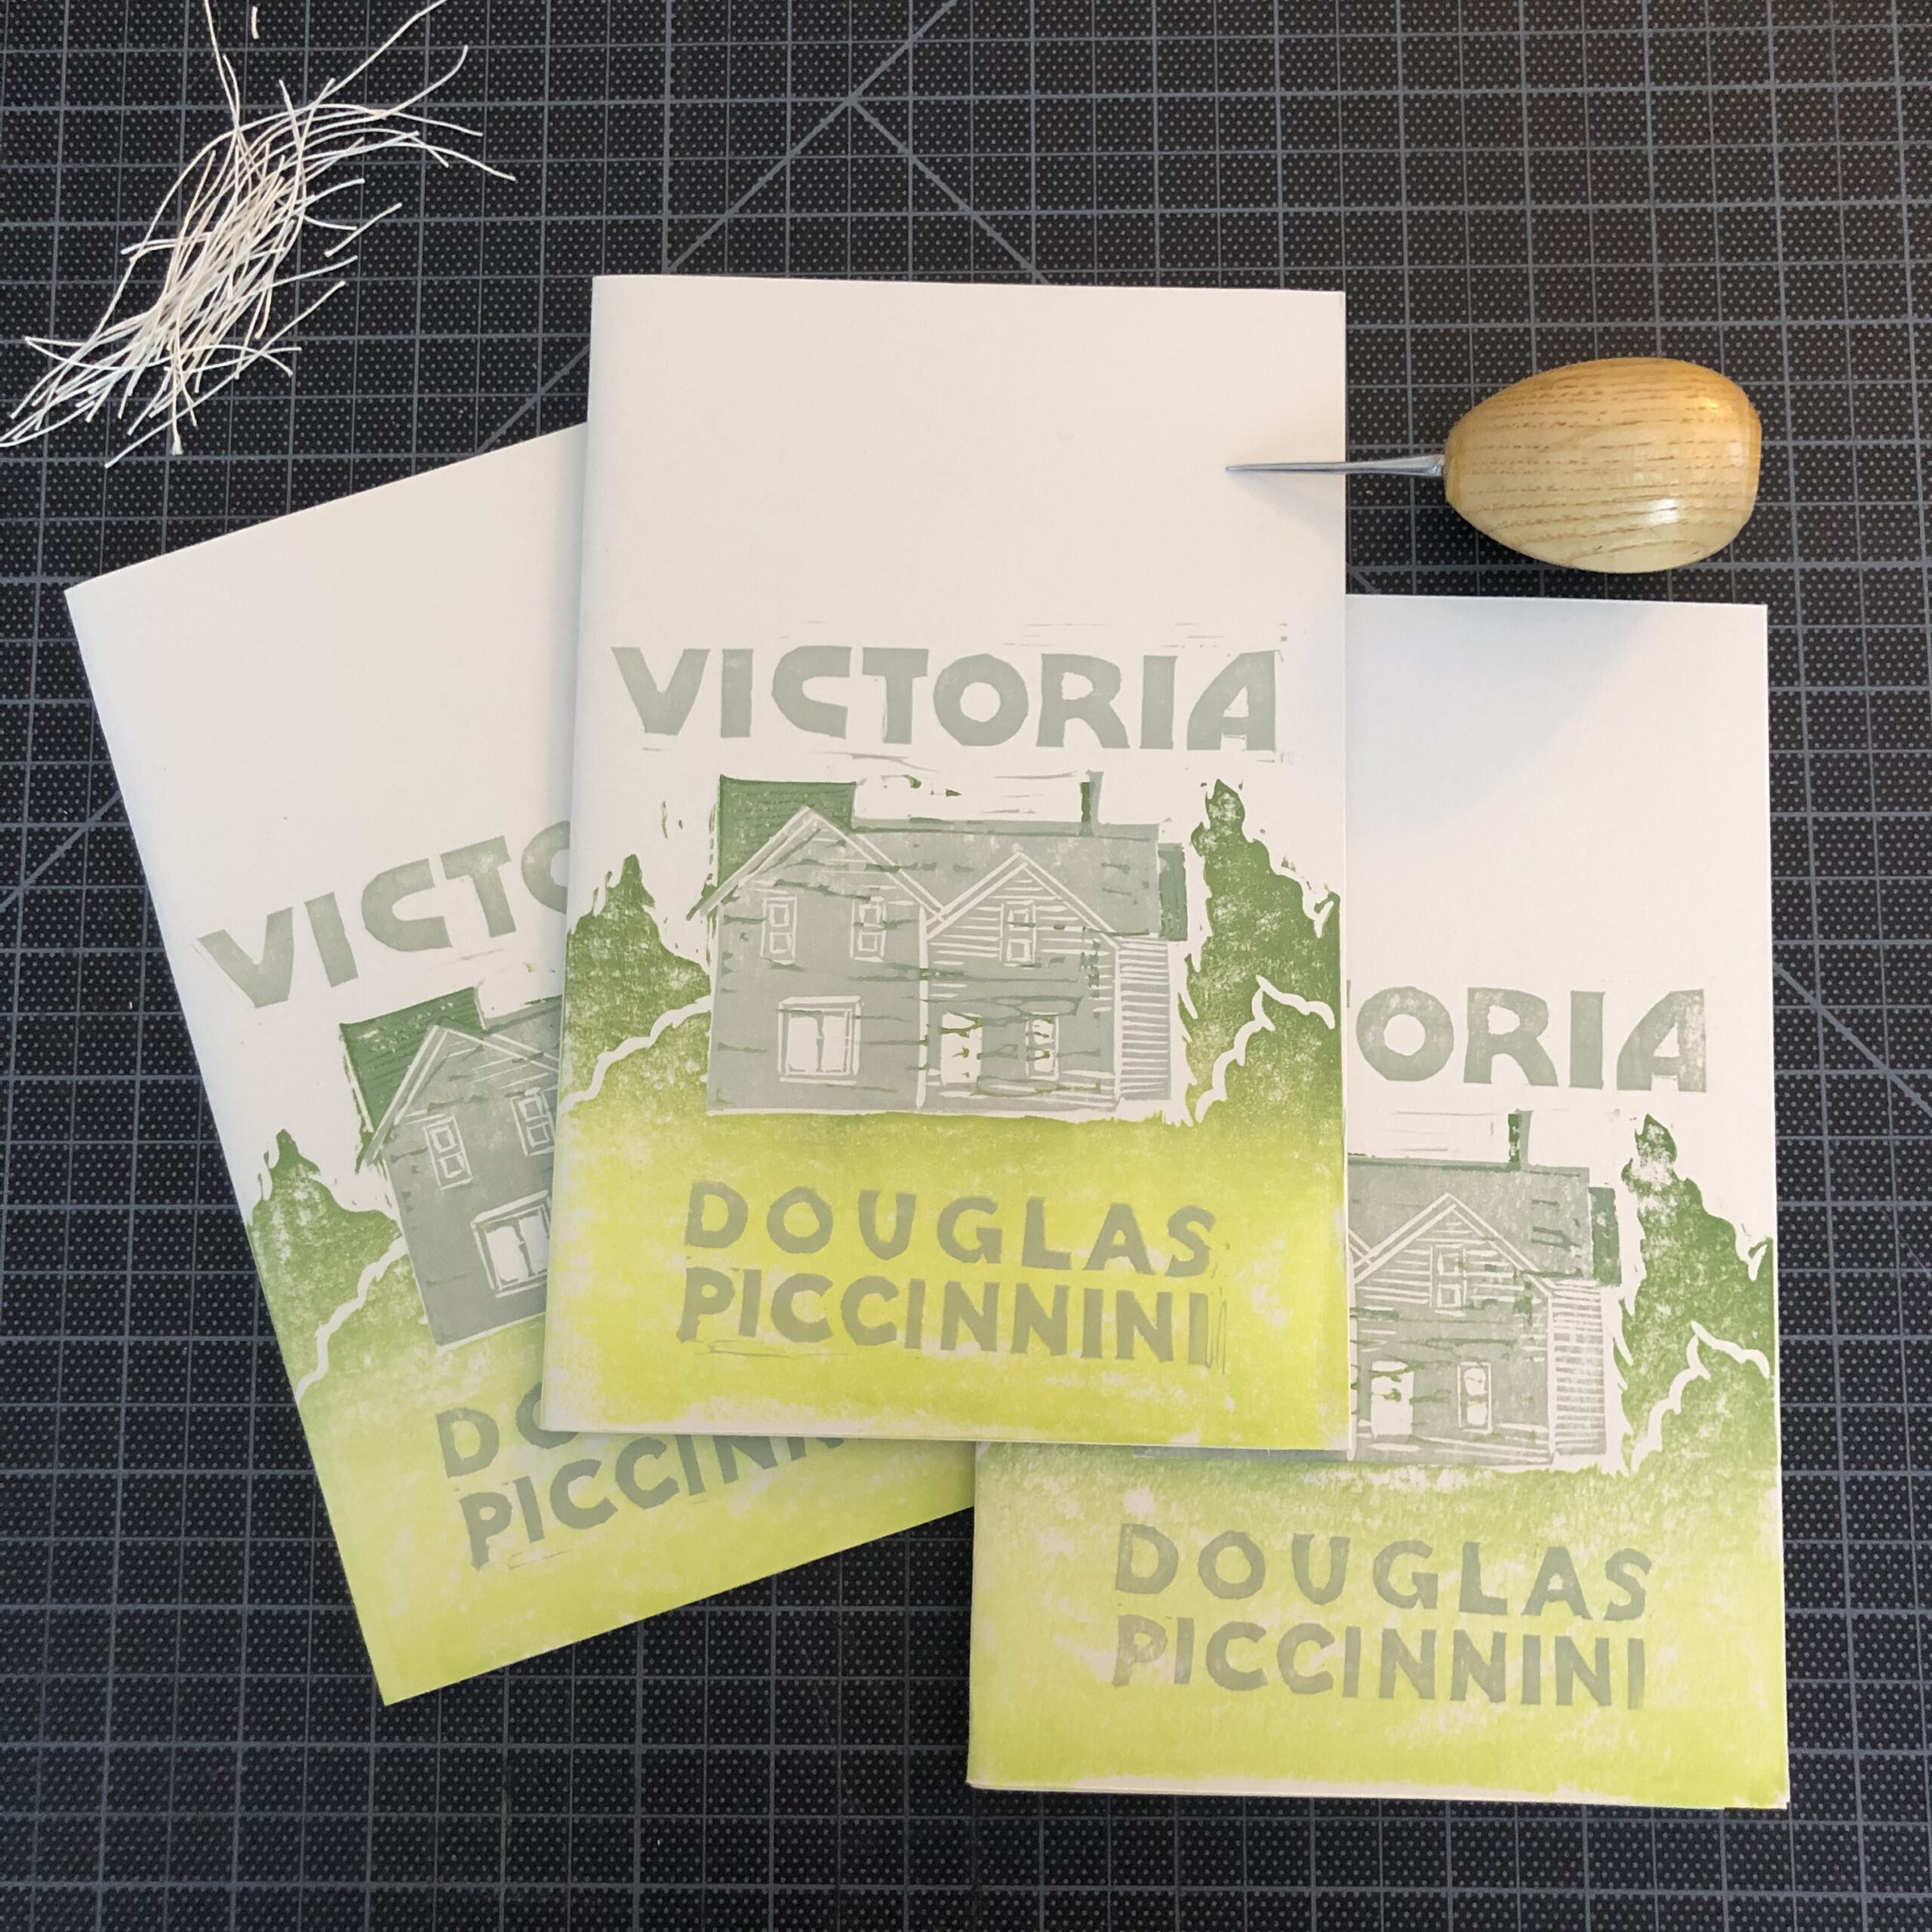 Three copies of Victoria by Douglas Piccinnini. The hand-printed linocut cover design consists of a gray house in a gradient green landscape, with gray title and author name lettering. The chapbooks are fanned out on a black gridded cutting mat, with a pile of string in the upper left, and a wooden-handled awl in the upper right.